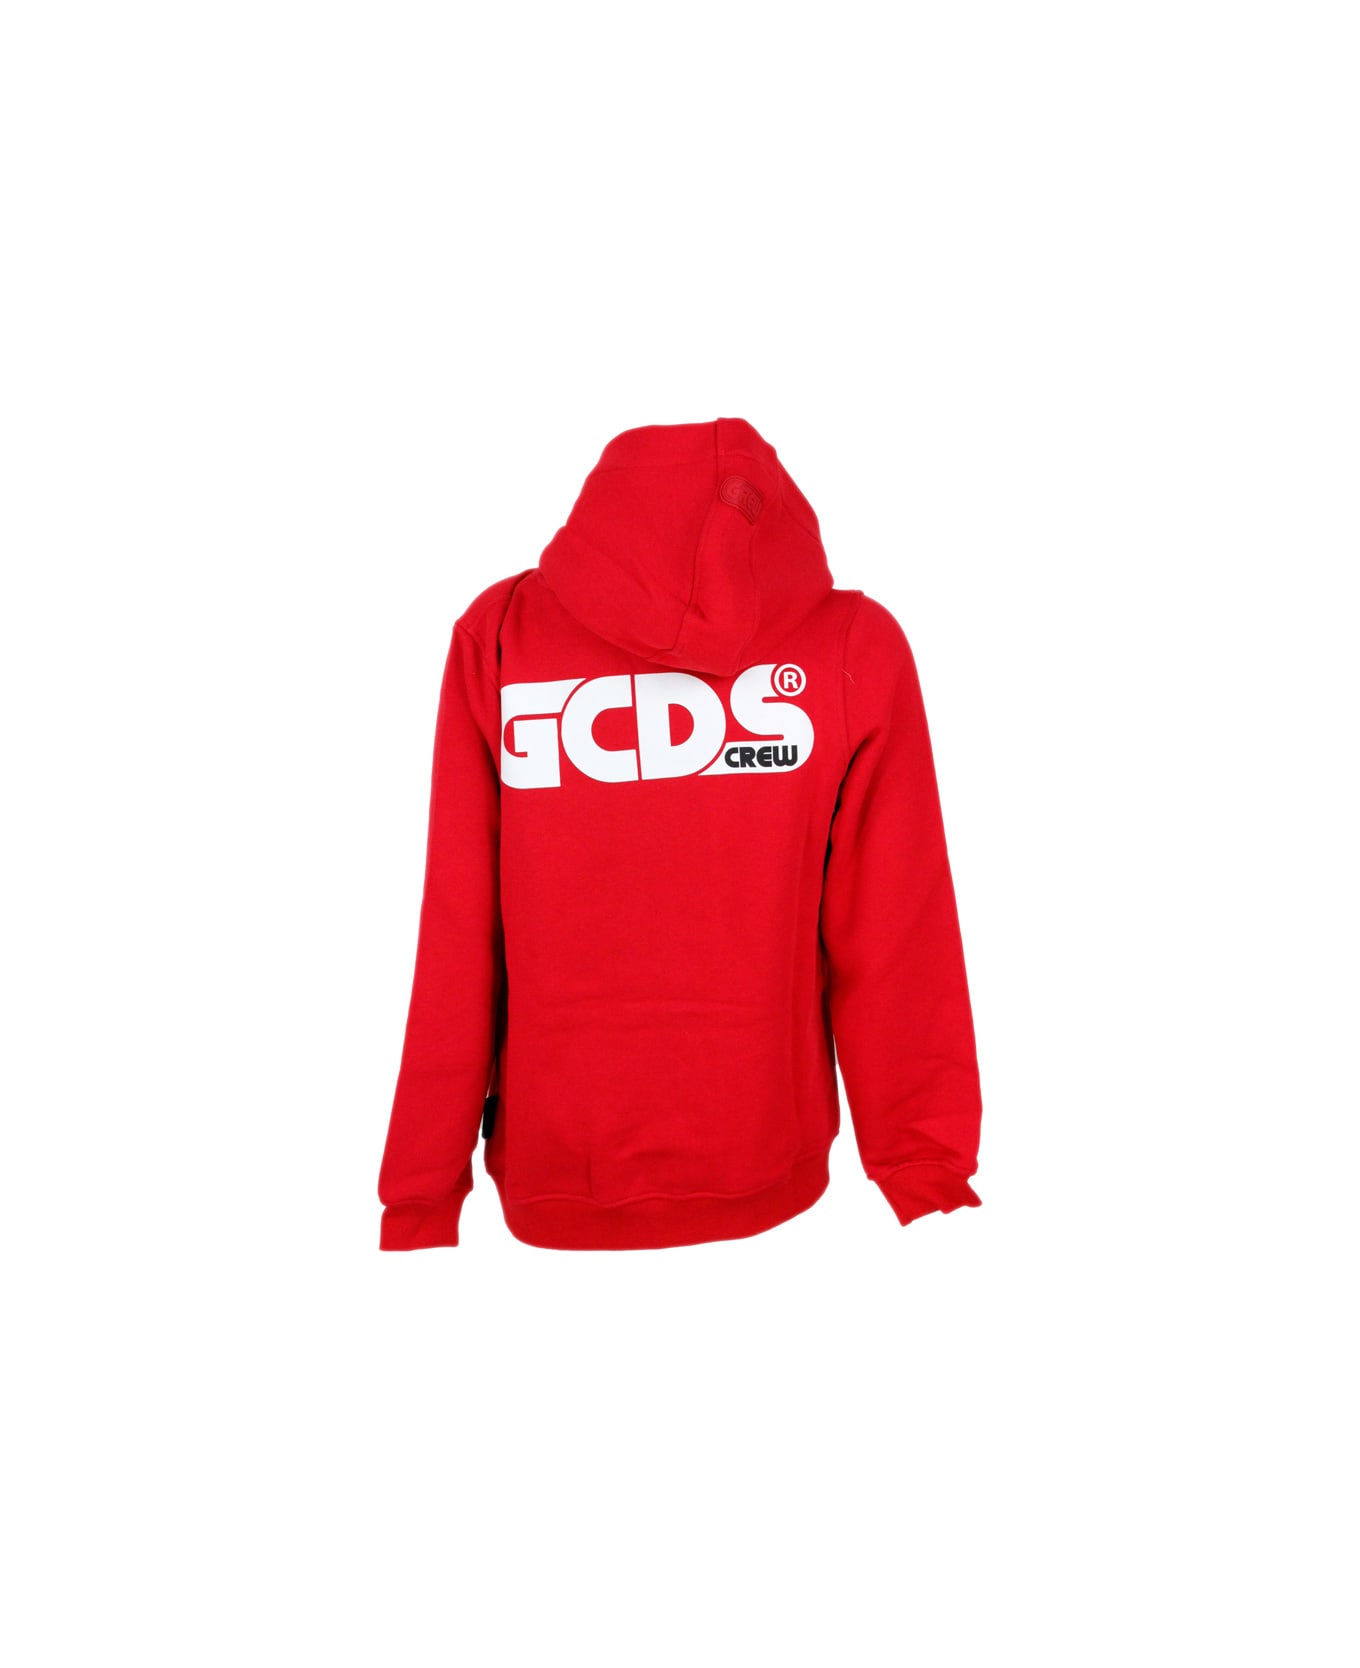 GCDS Cotton Sweatshirt With Zip And Hood With Logo Lettering On The Chest - Red